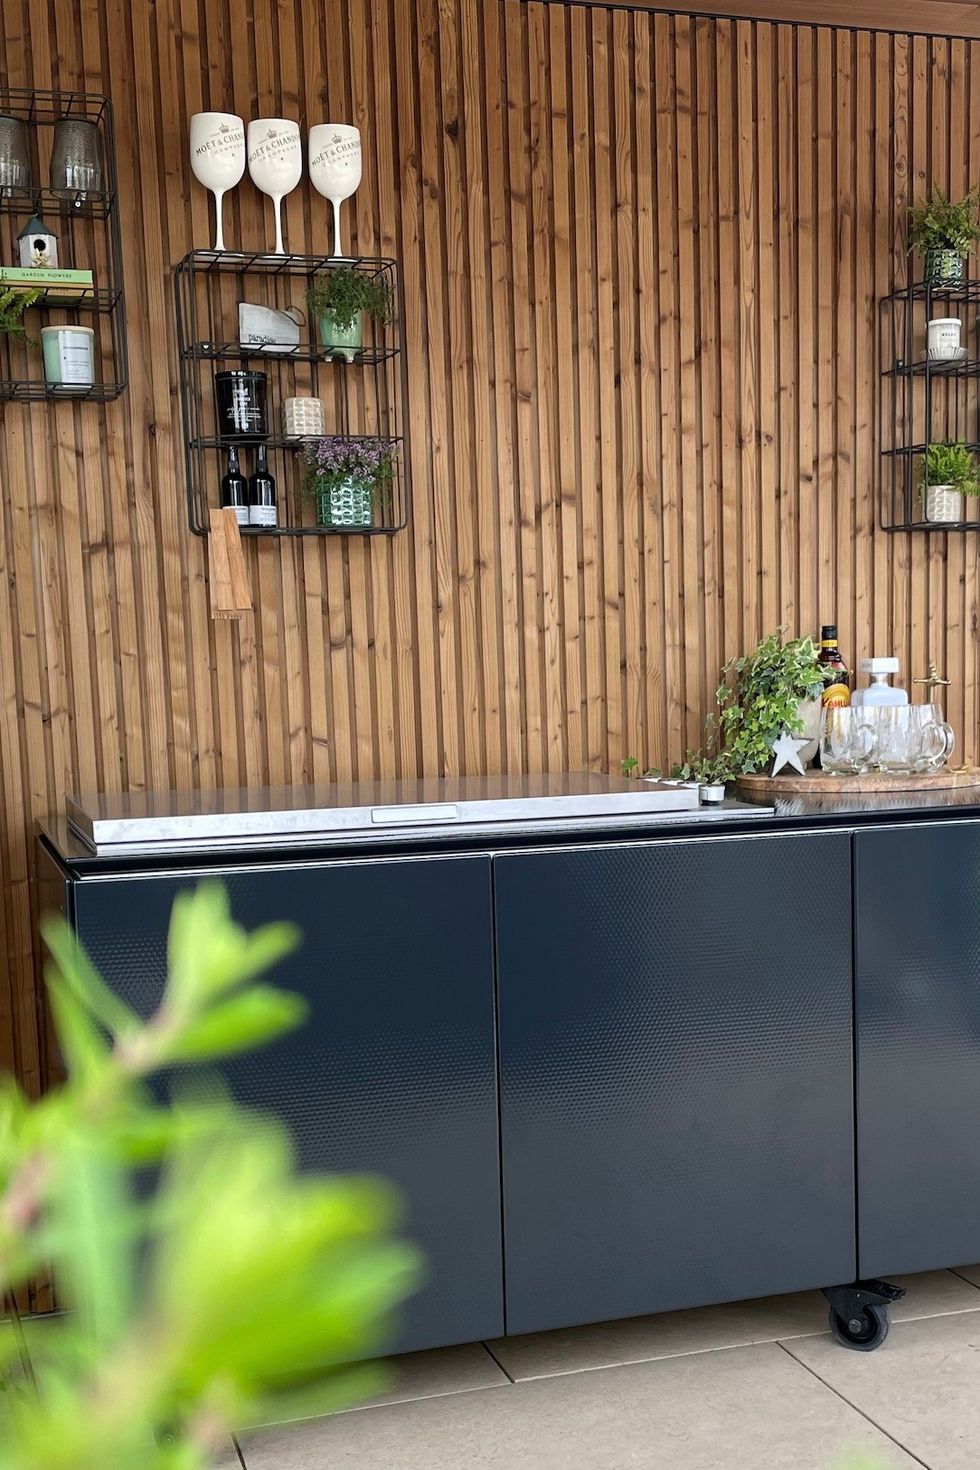 Biggest Home Design Trends To Emerge This Summer 2022, Houzz UK